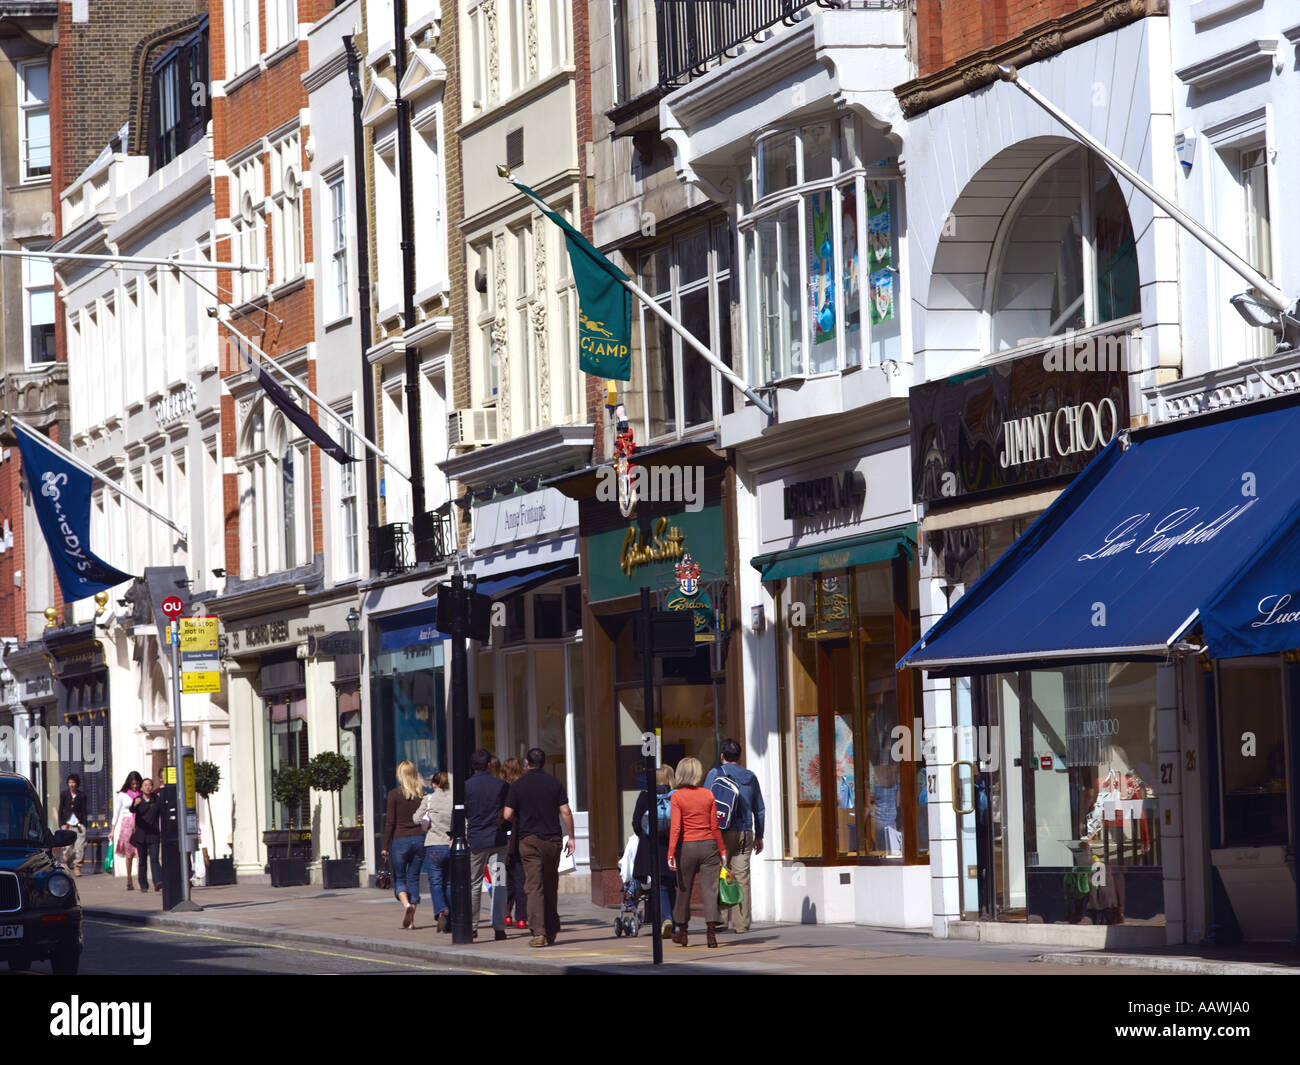 Bond street london chanel hi-res stock photography and images - Alamy